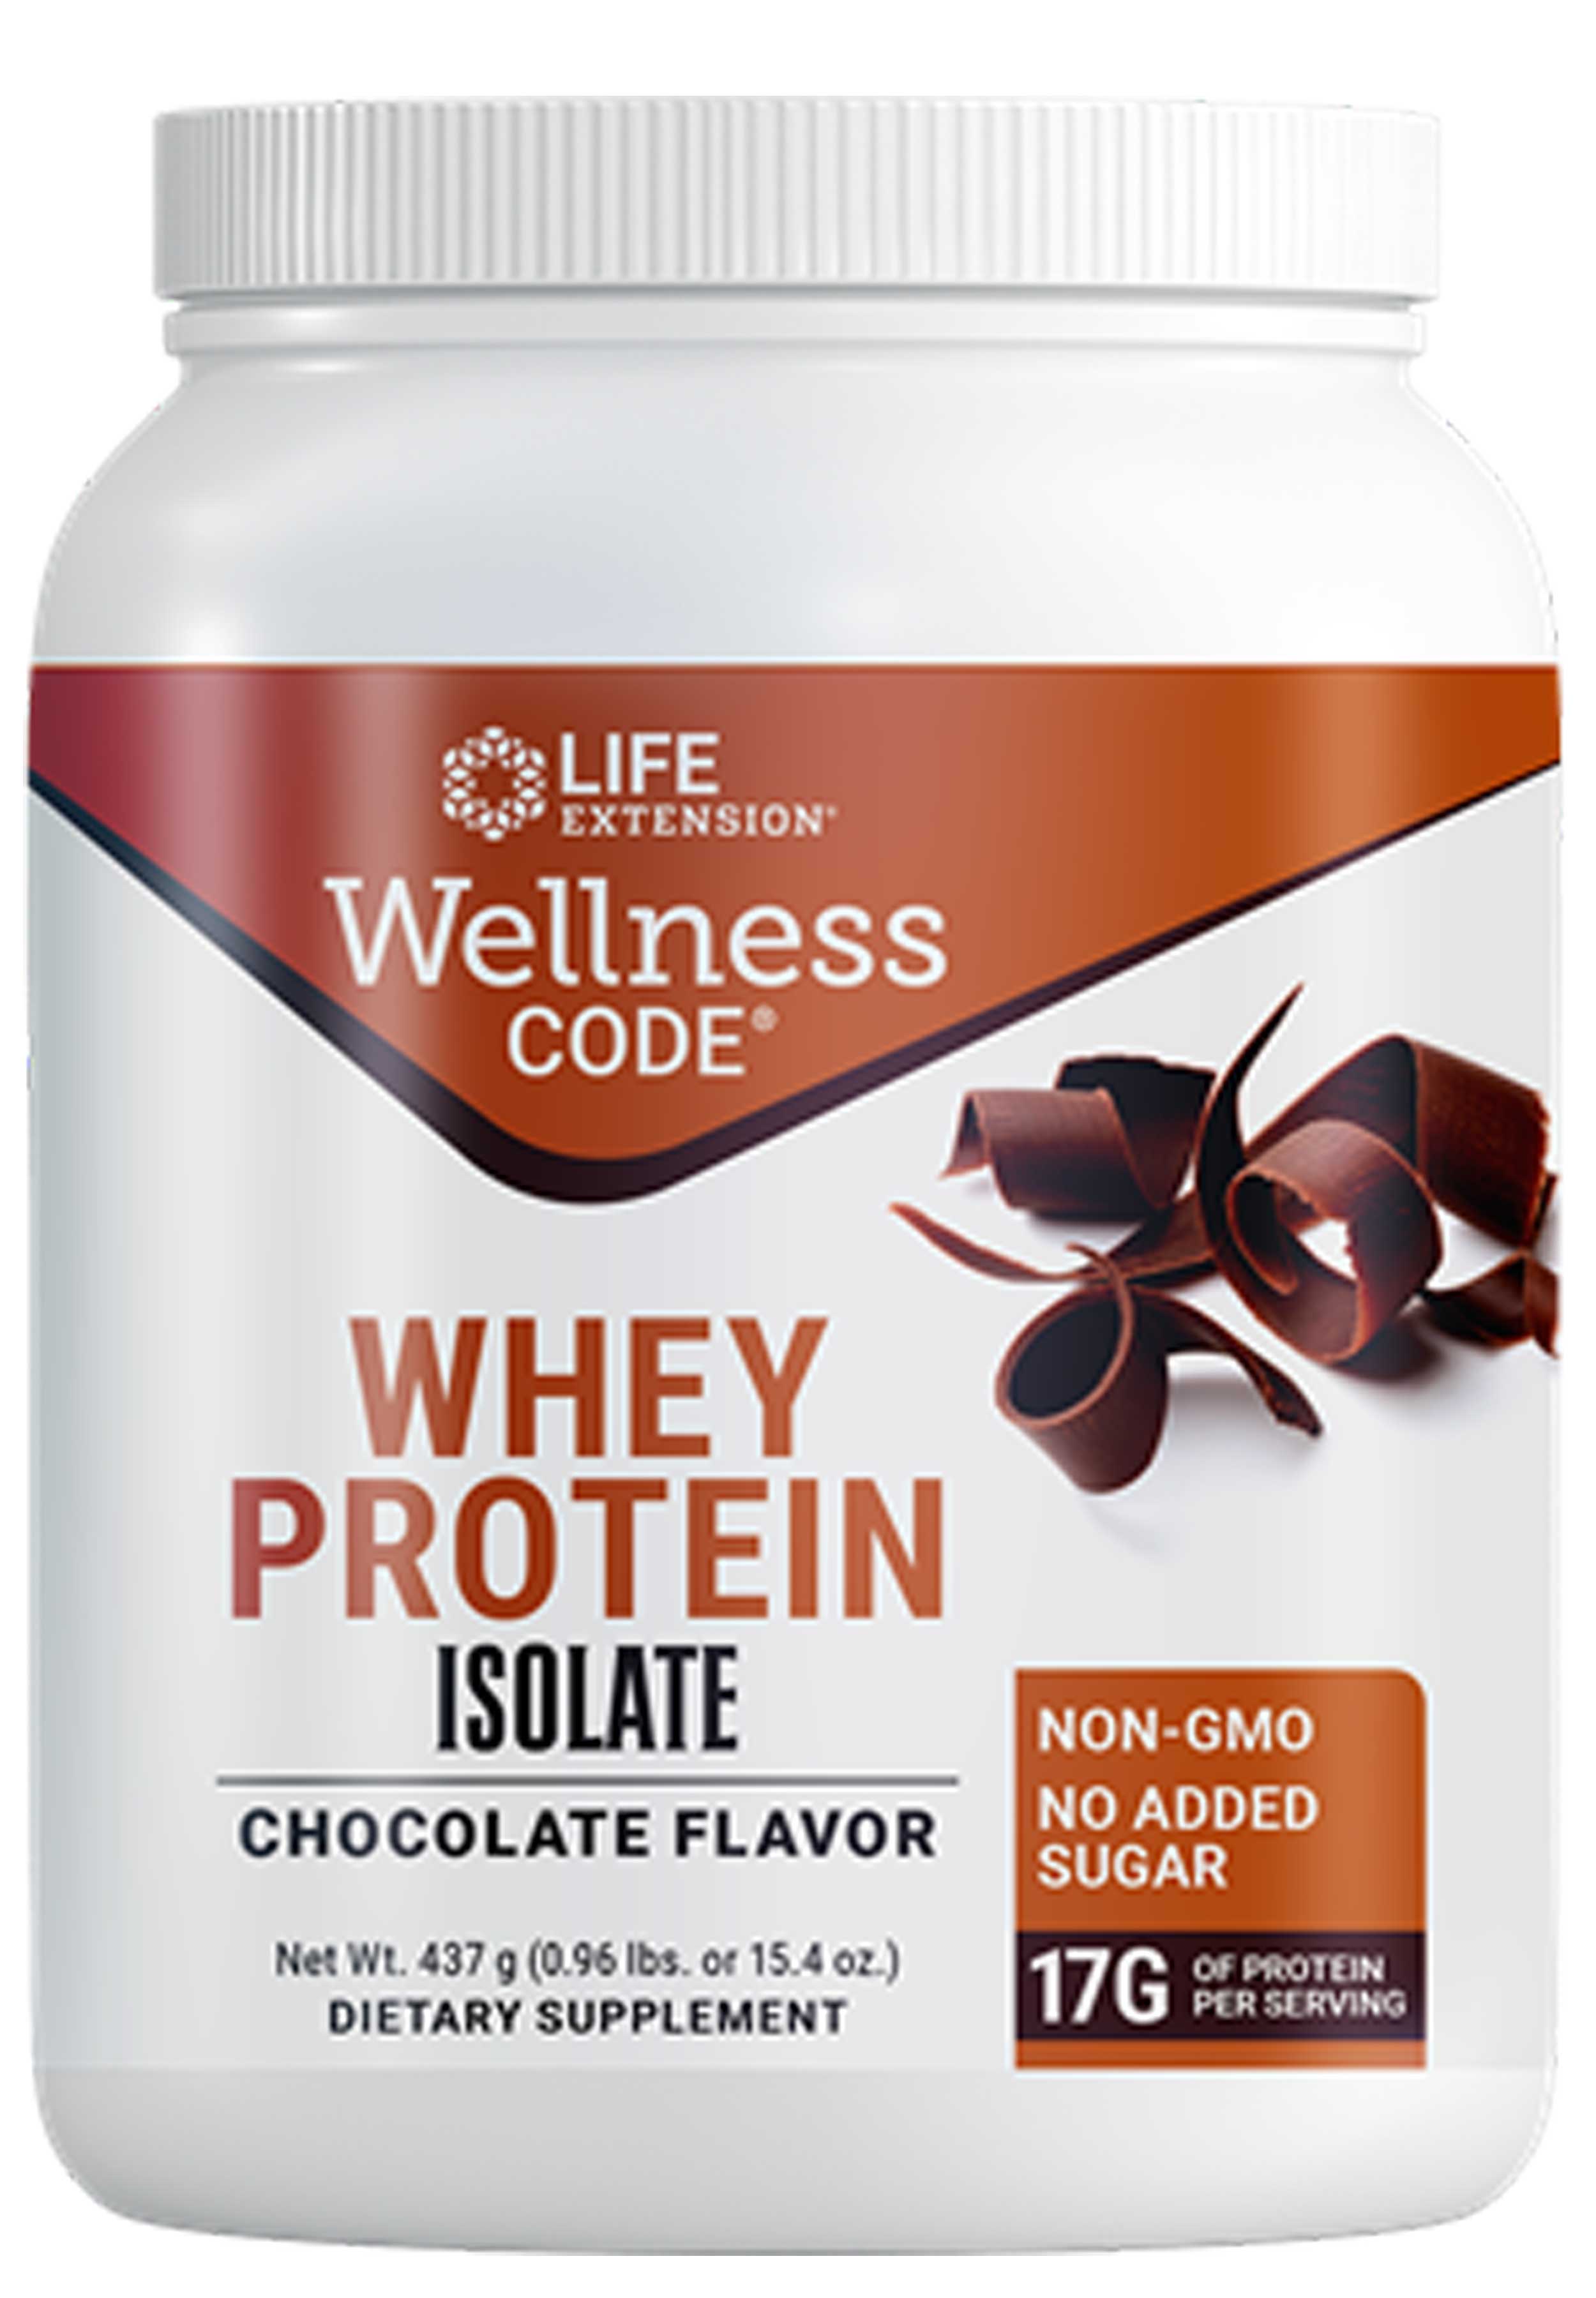 Life Extension Whey Protein Isolate Chocolate